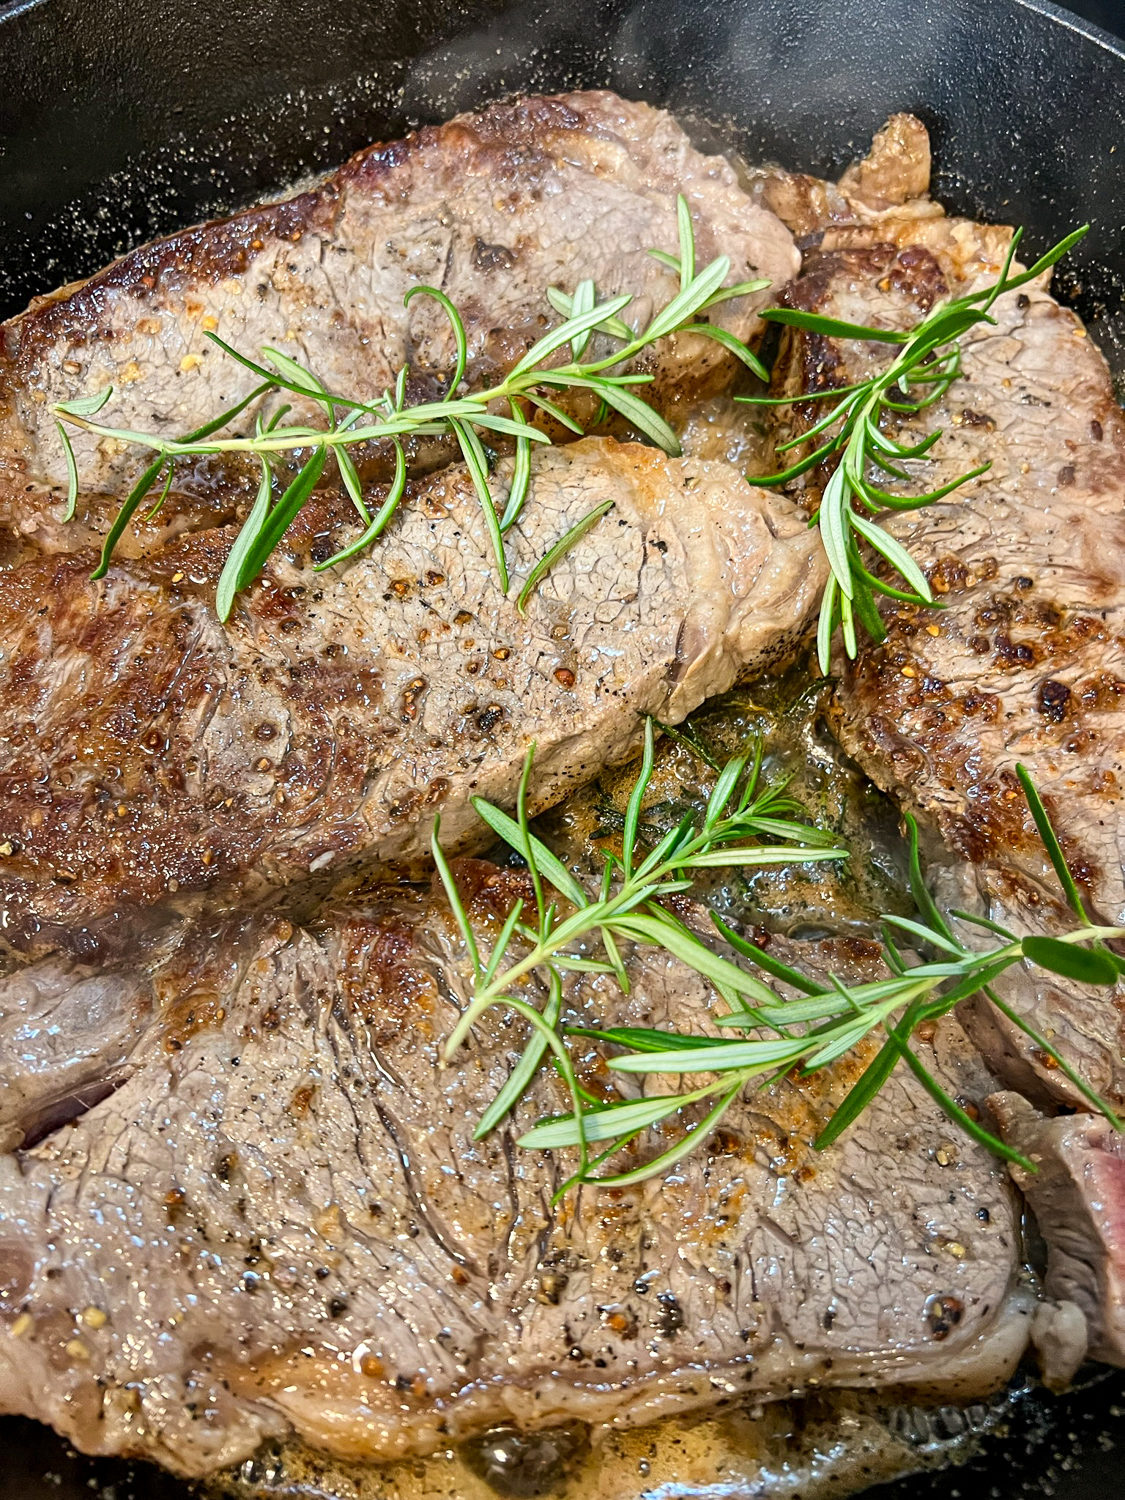 Perfectly seared and cooked steak garnished with fresh rosemary in a skillet.